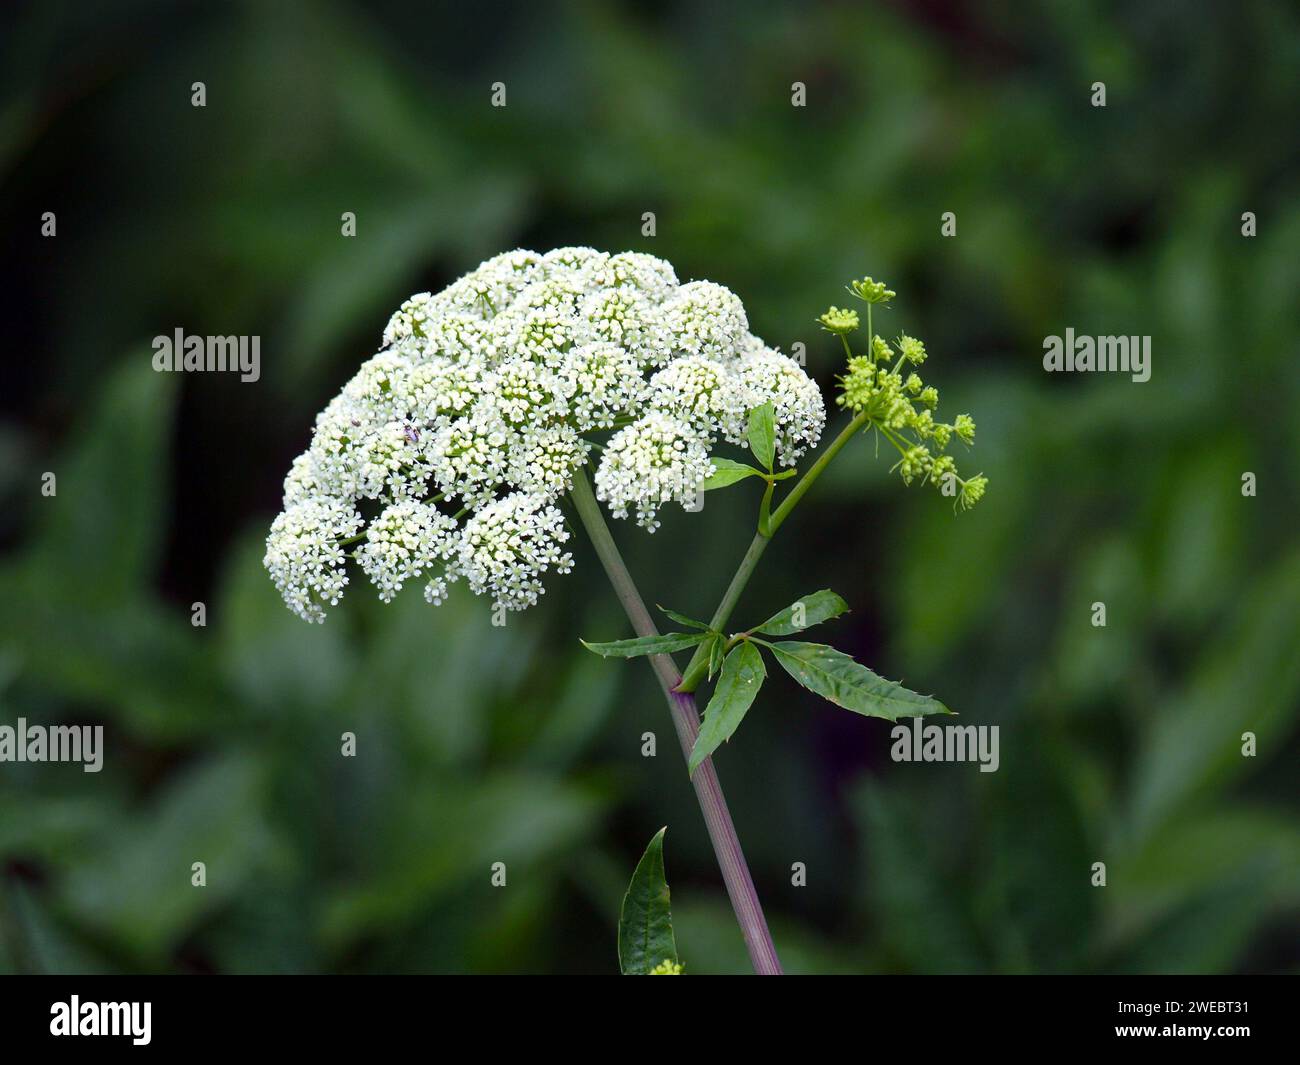 Water Hemlock or Cicuta. This is one of North America's most toxic plants being poisonous to humans. Stock Photo